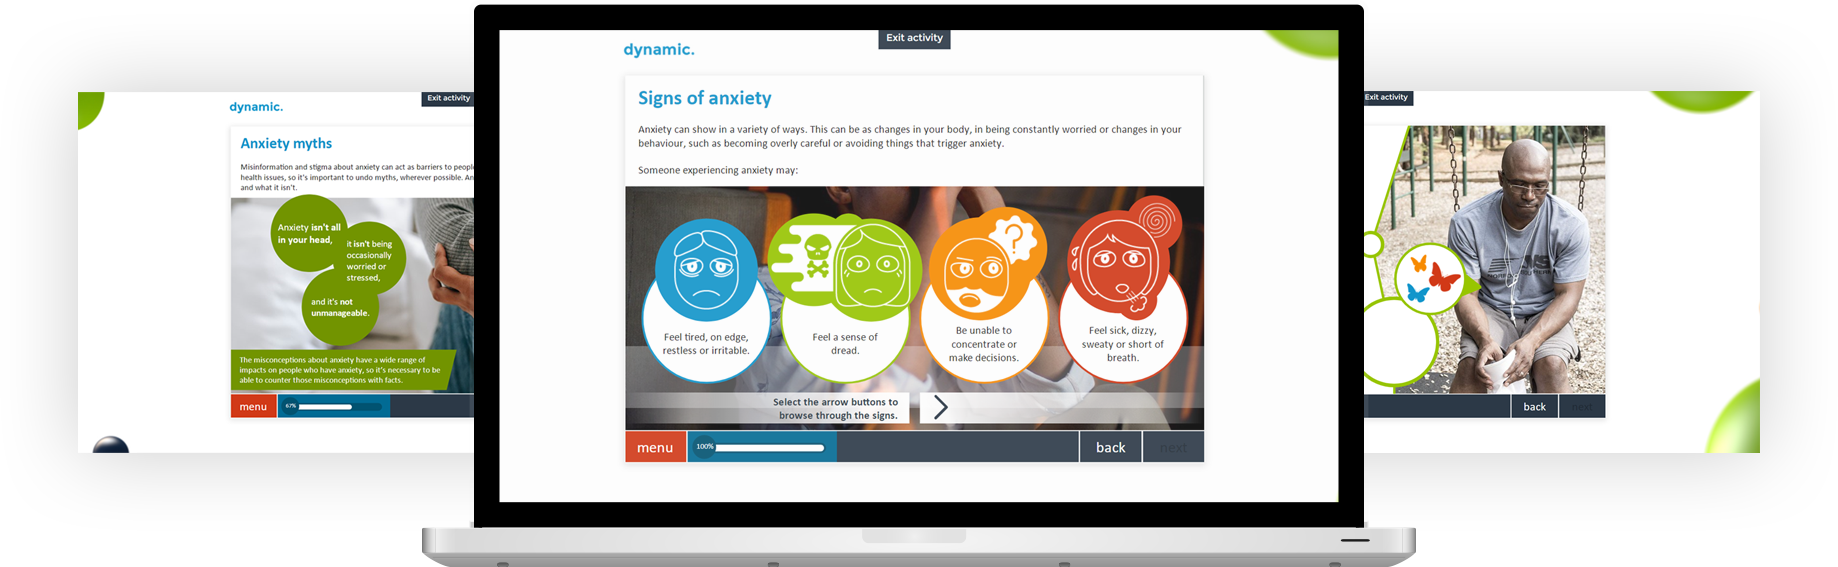 Dynamic elearning module examples